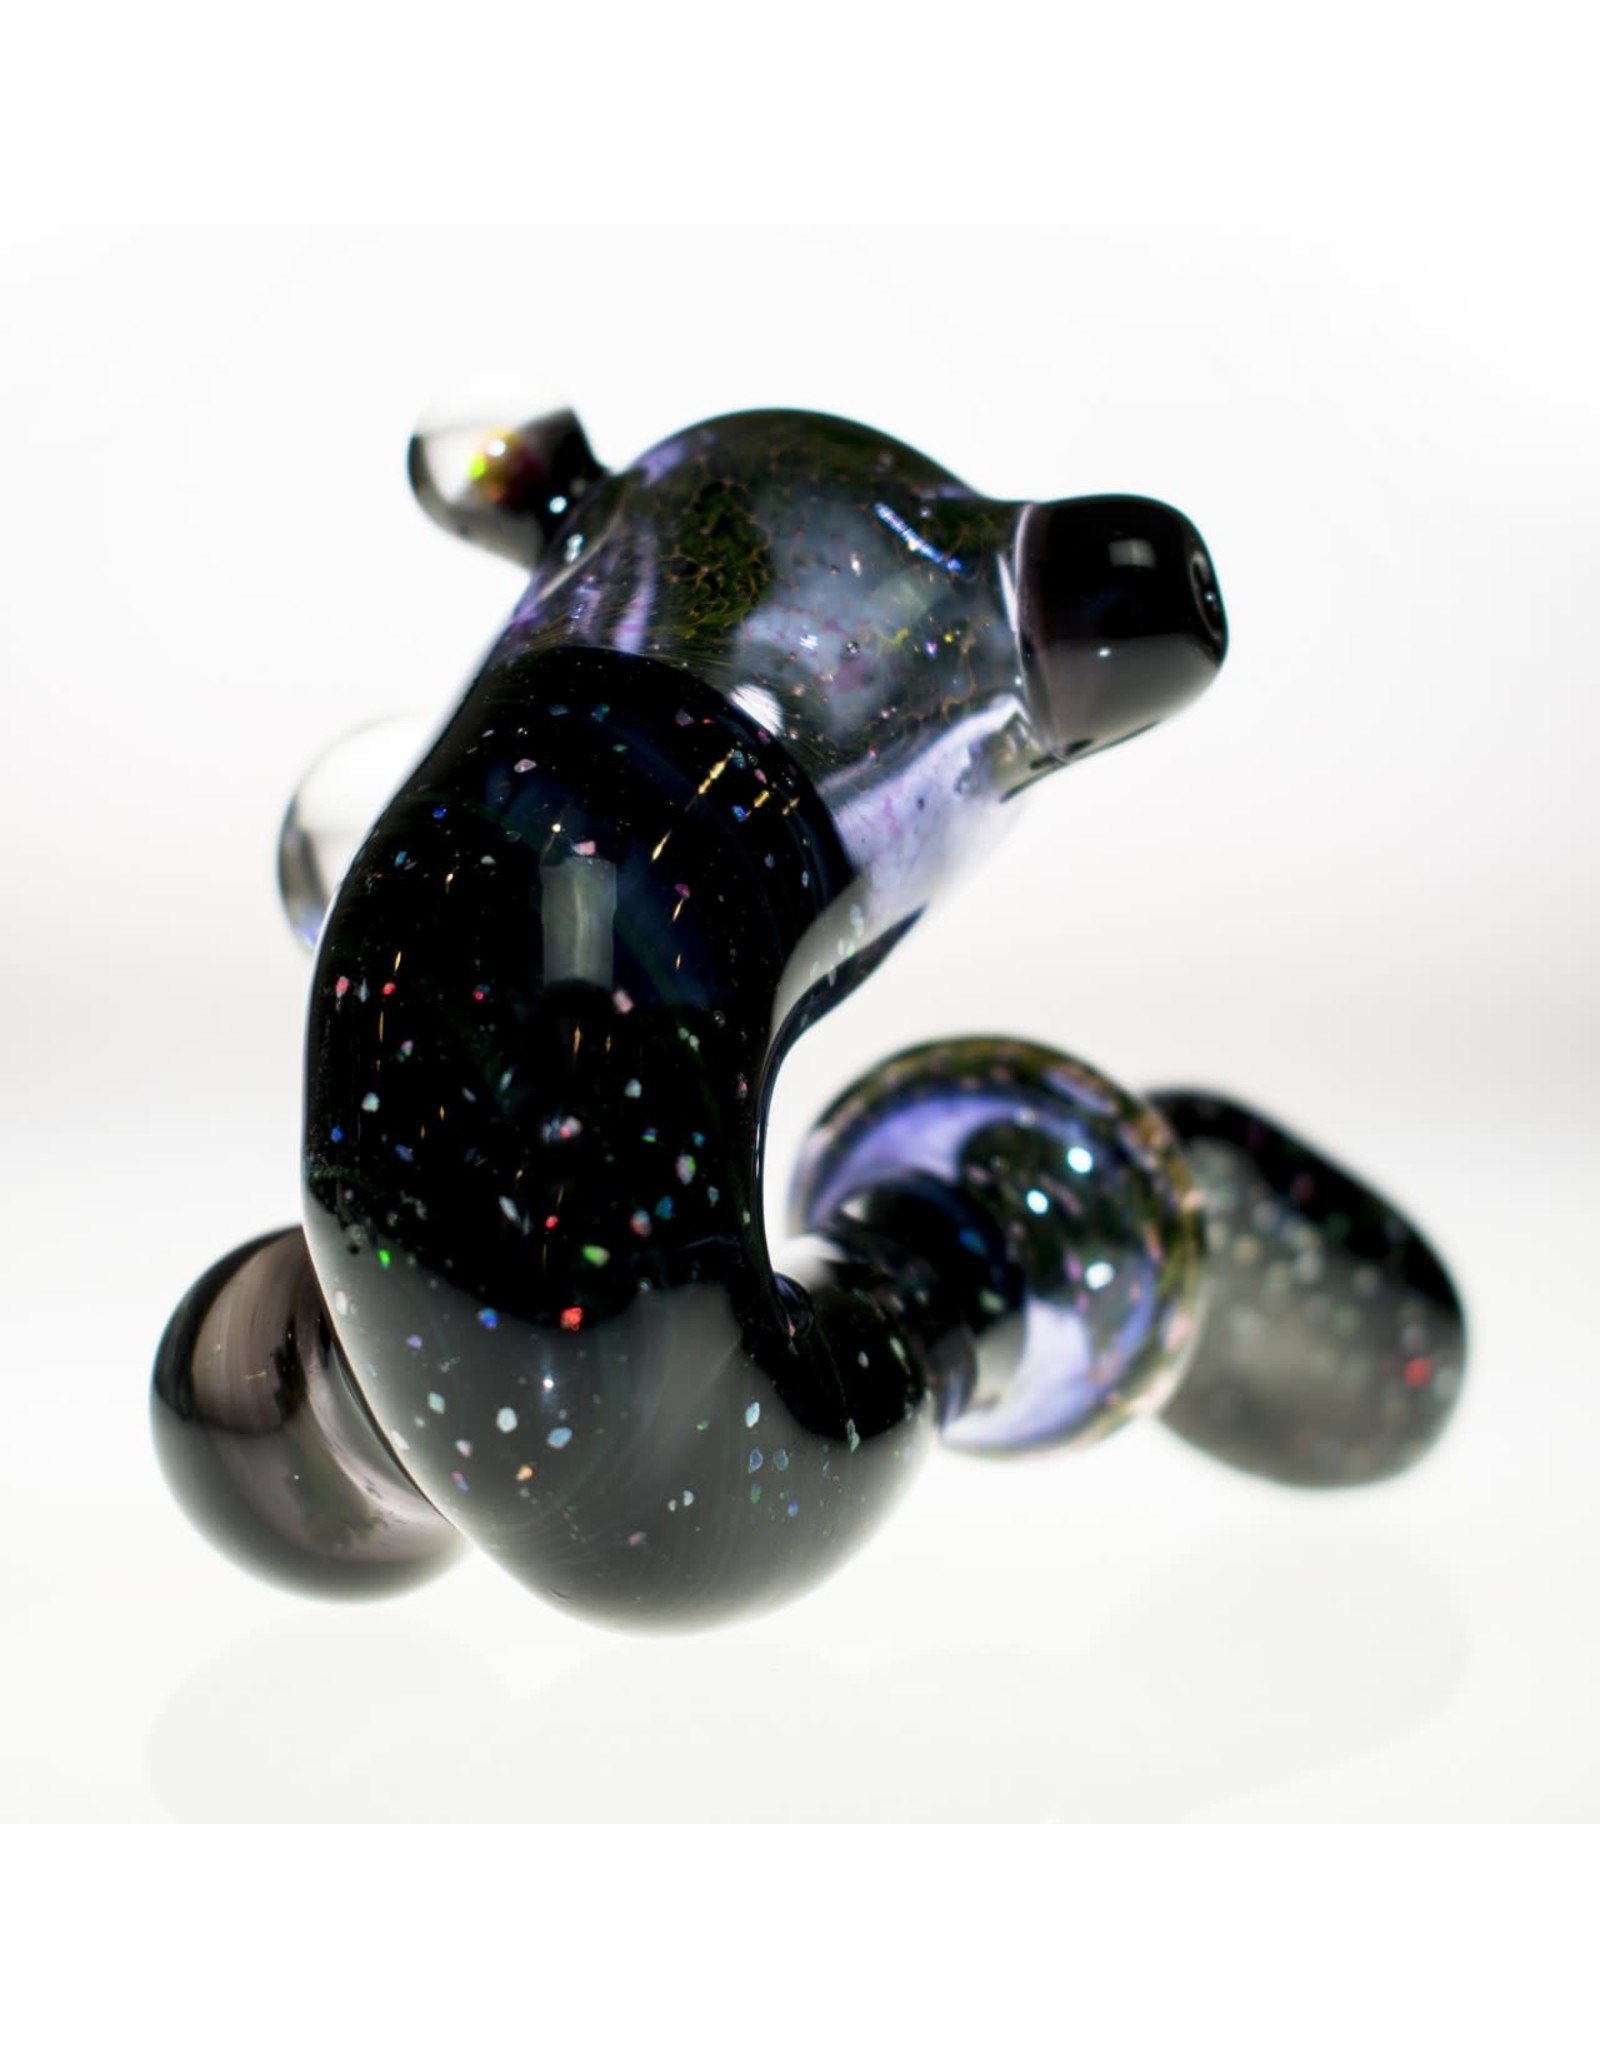 Rex Glass Sherlock crushed opal with lightning bolt dicro image and round opal marbles